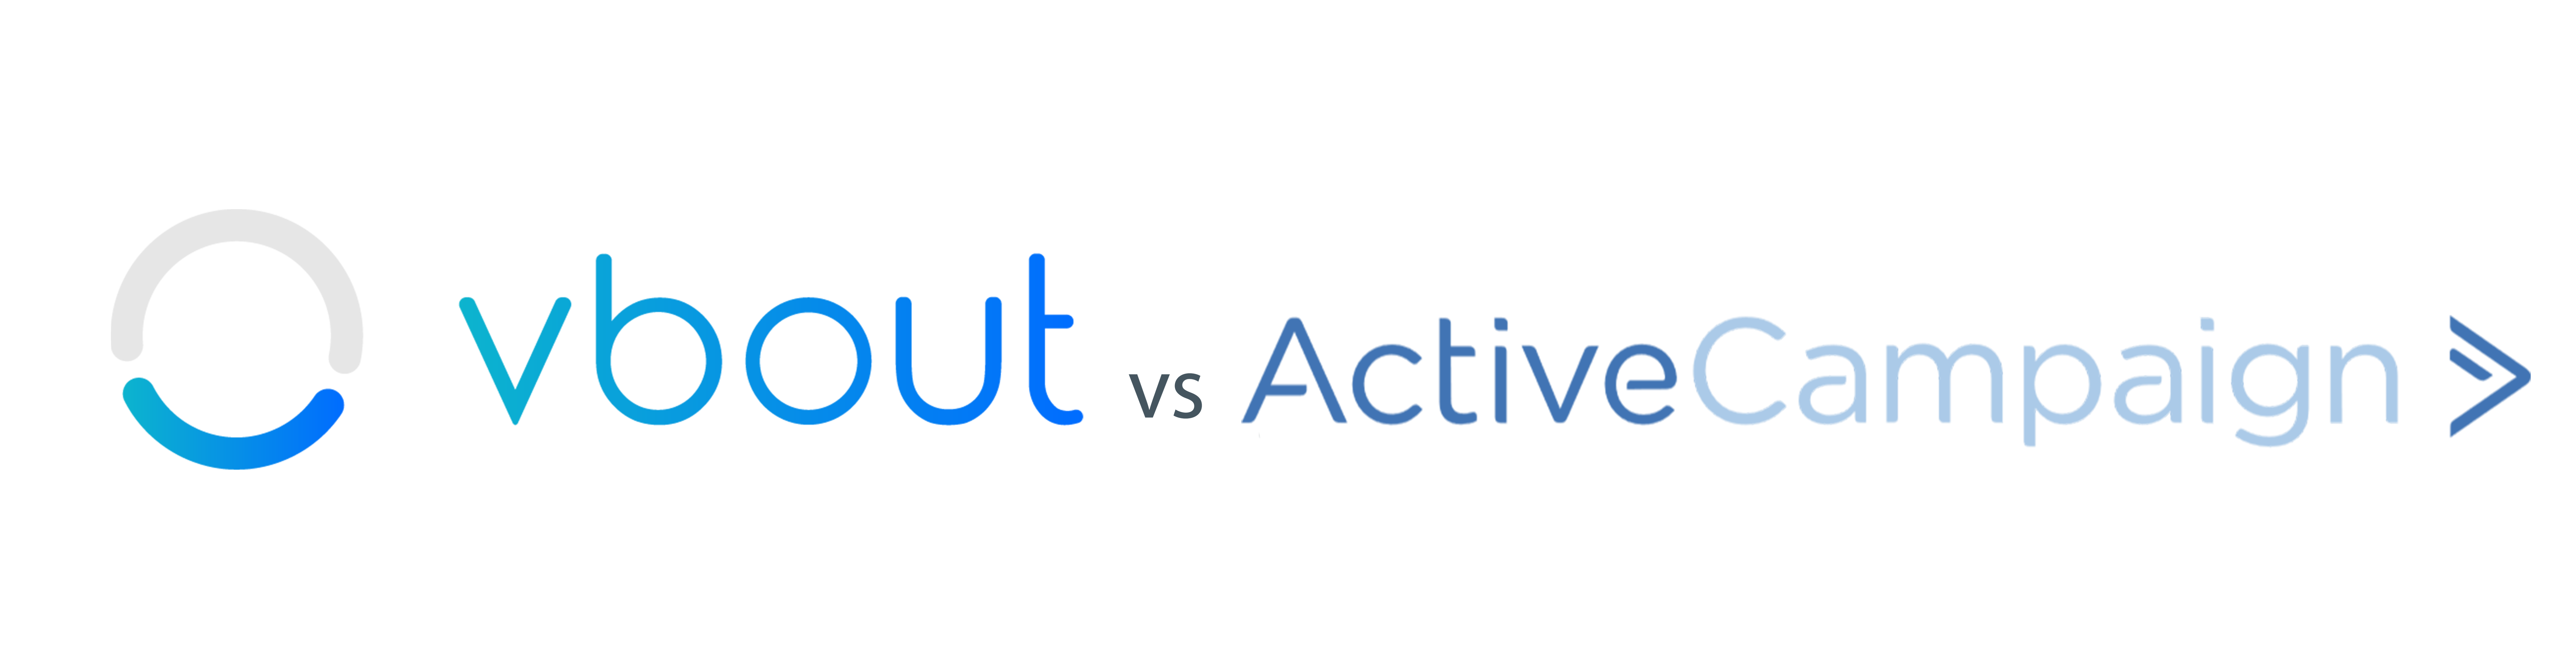 Comparing-VBOUT-and-ActiveCampaign